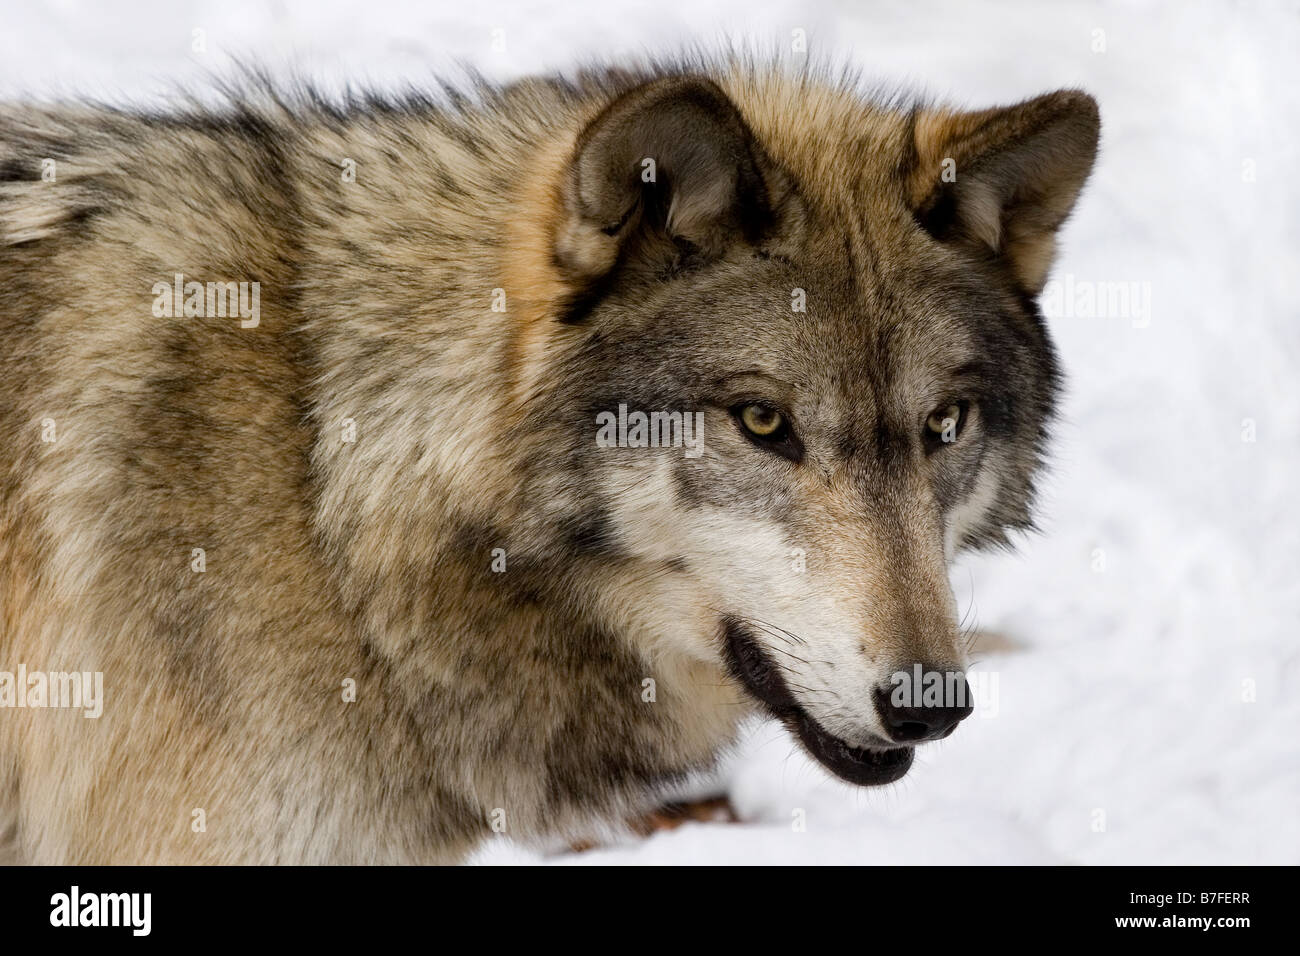 Timber Wolf Canis lupus lycaon in snow Stock Photo